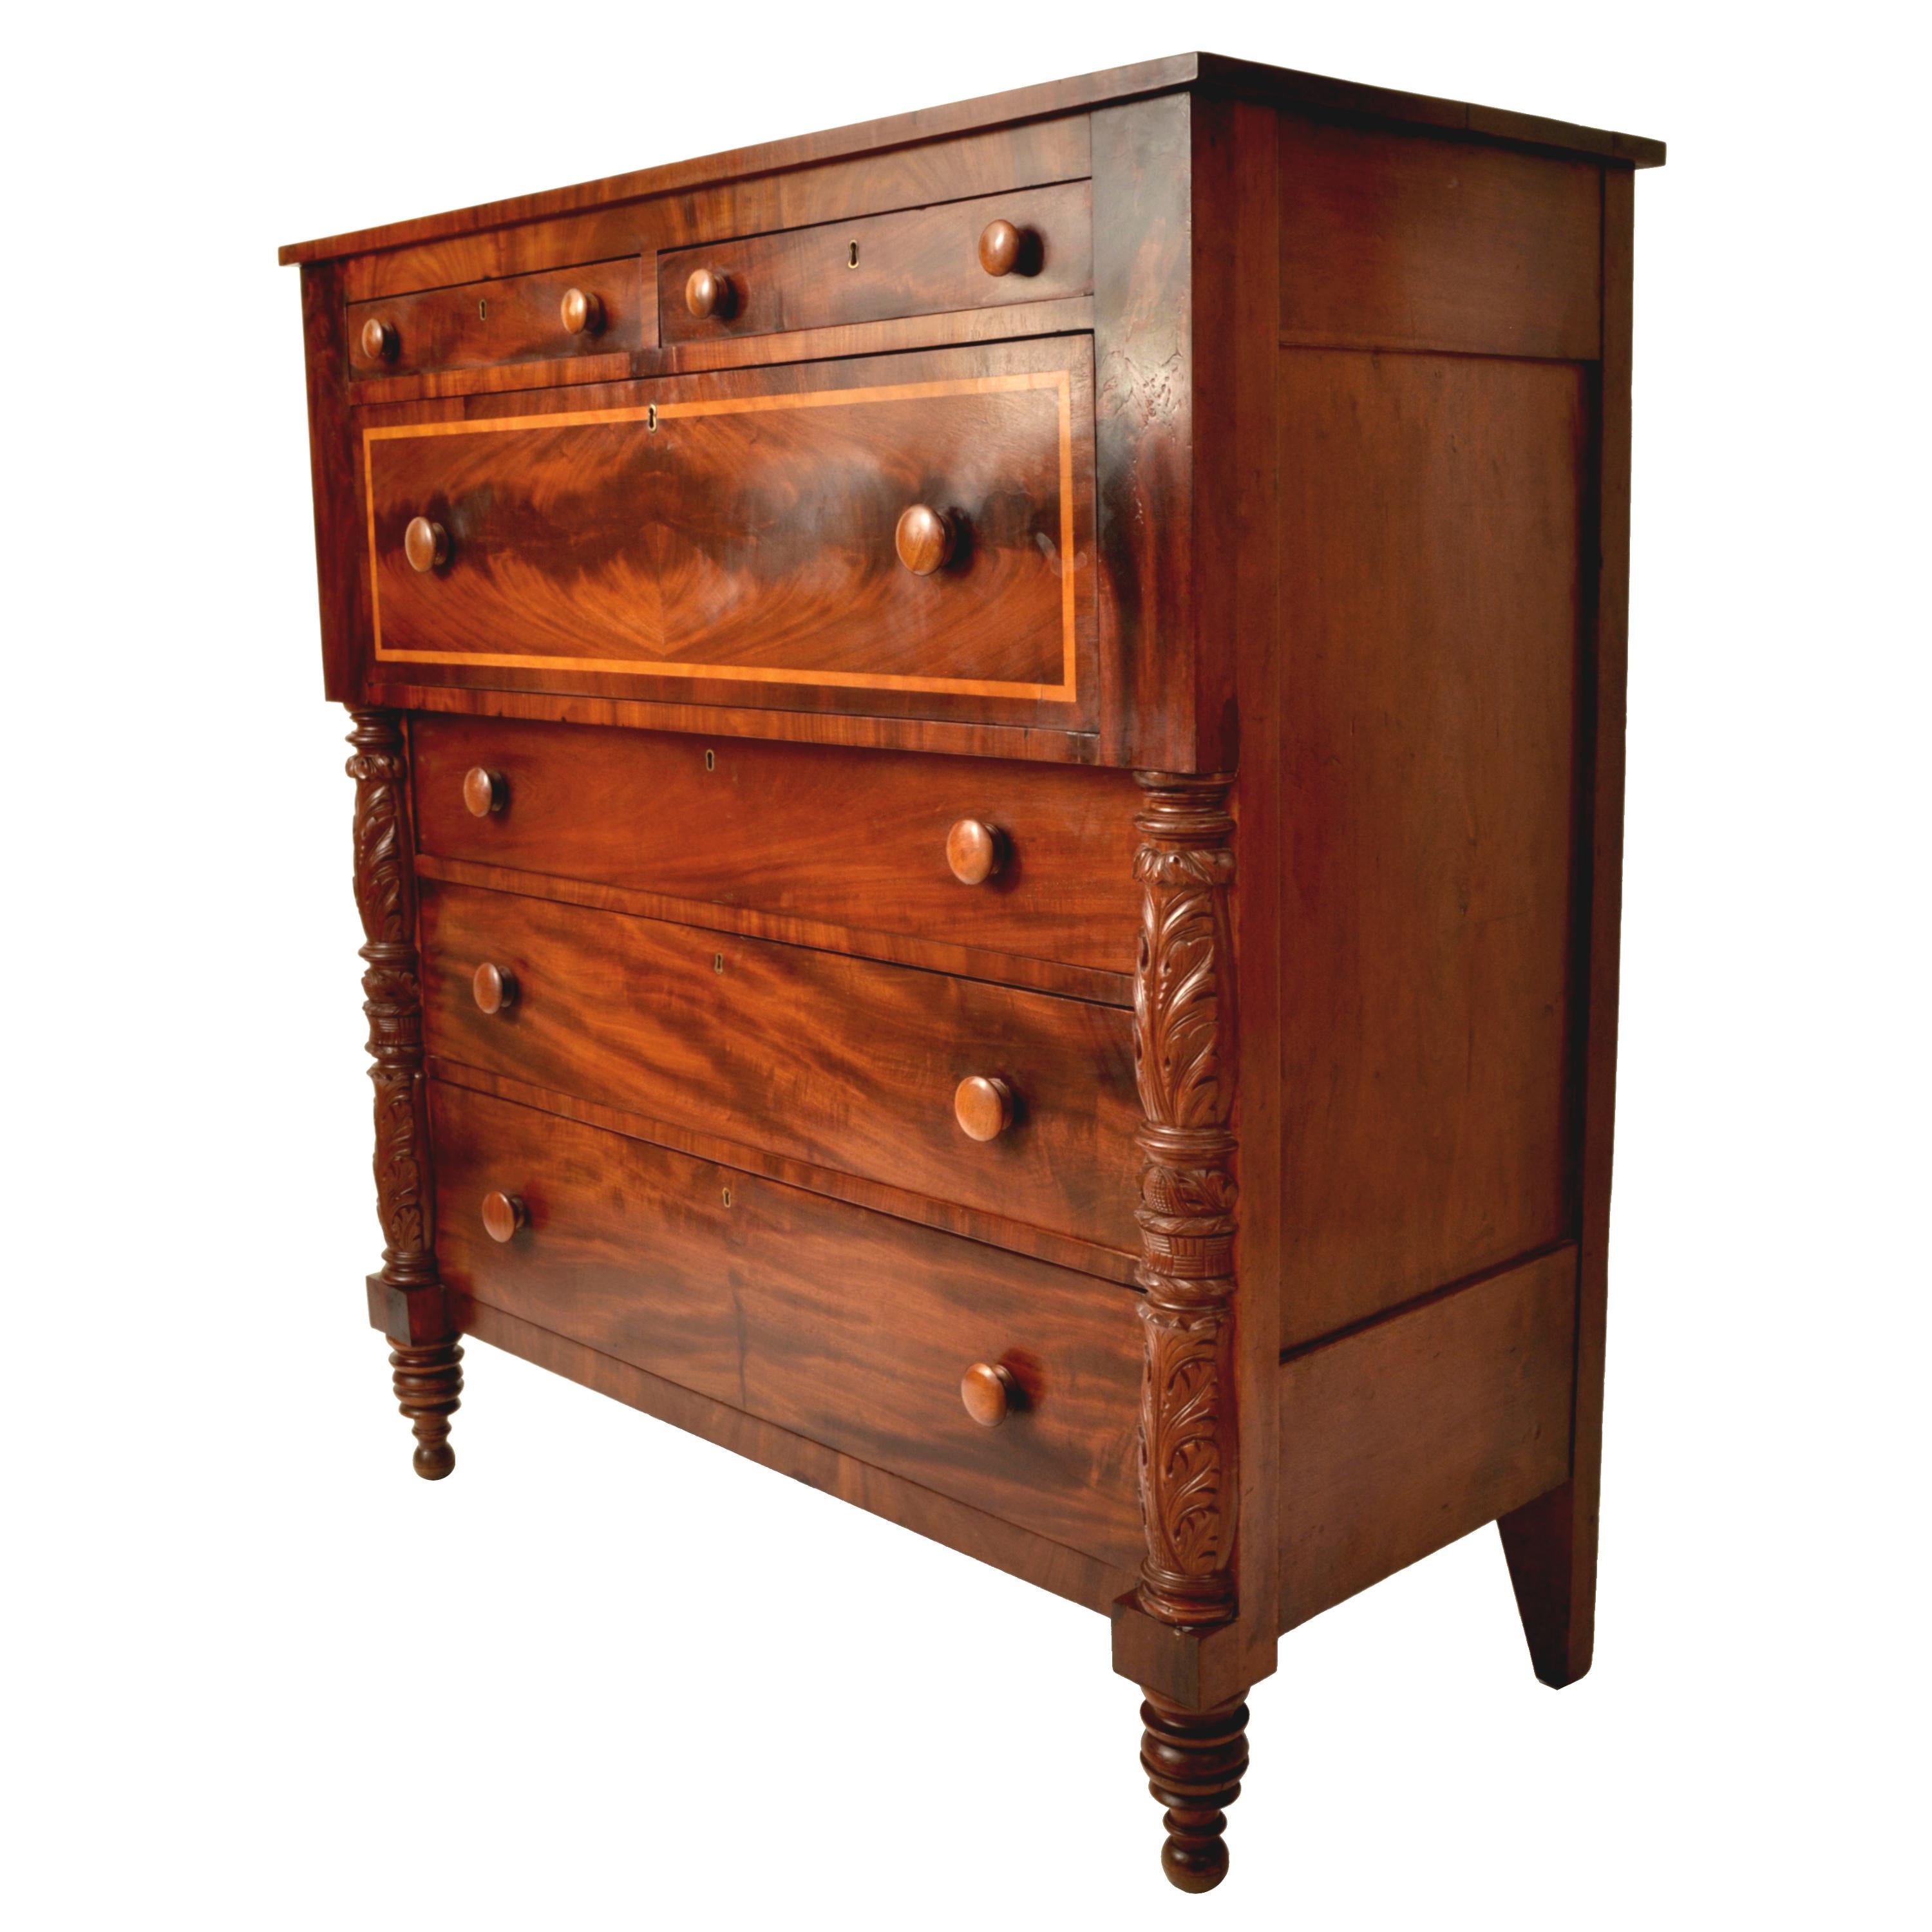 A good antique American Federal Classical period mahogany and maple butler's secretary, dresser desk, circa 1830. New York or Baltimore.
The dresser is made of the finest flame mahogany, the desk drawer is inlaid with maple banding, above are two